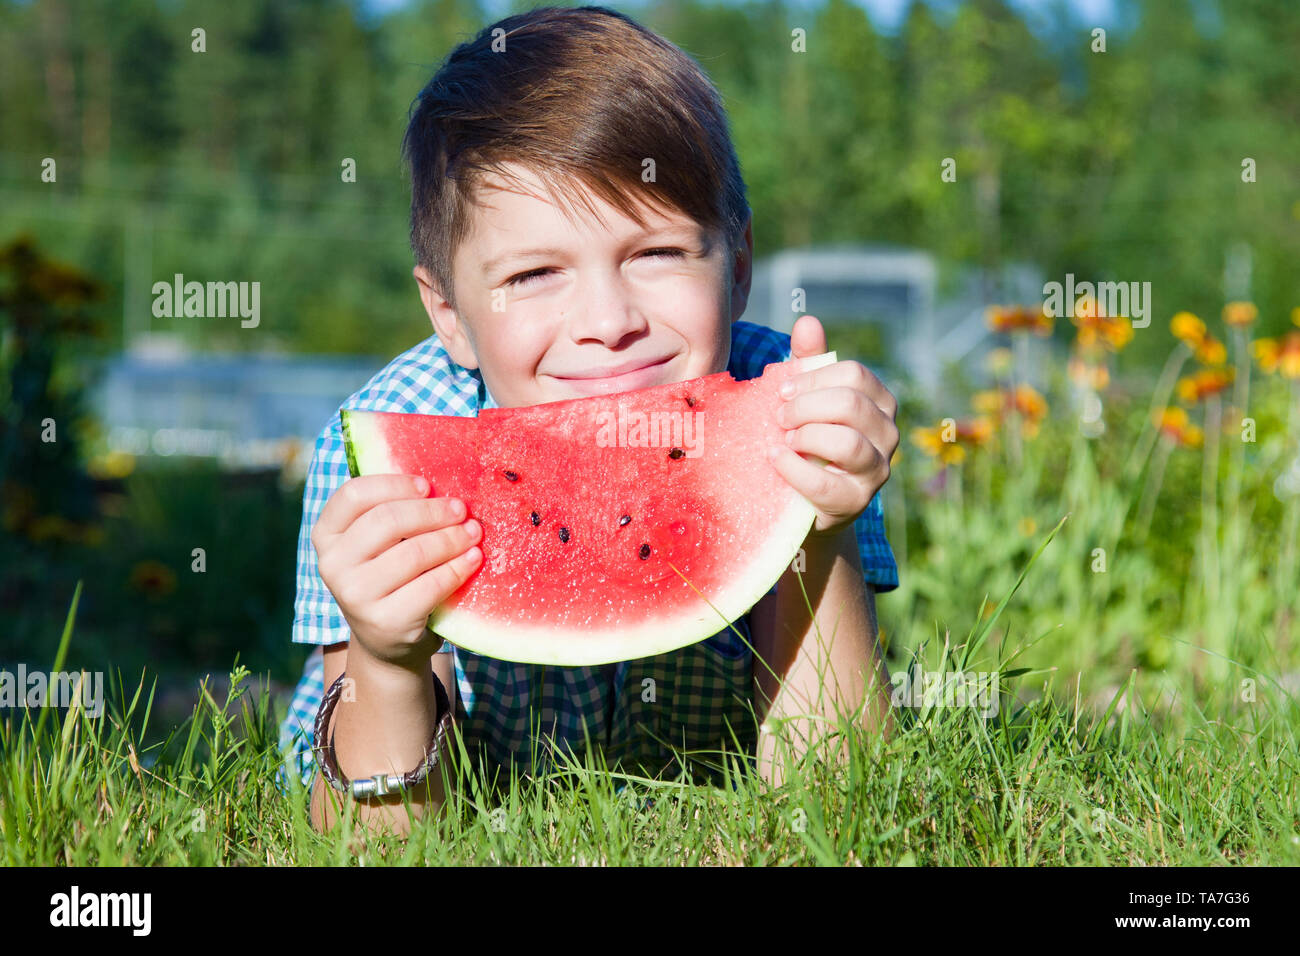 Funny boy eats watermelon outdoors in summer park, healthy food Stock Photo